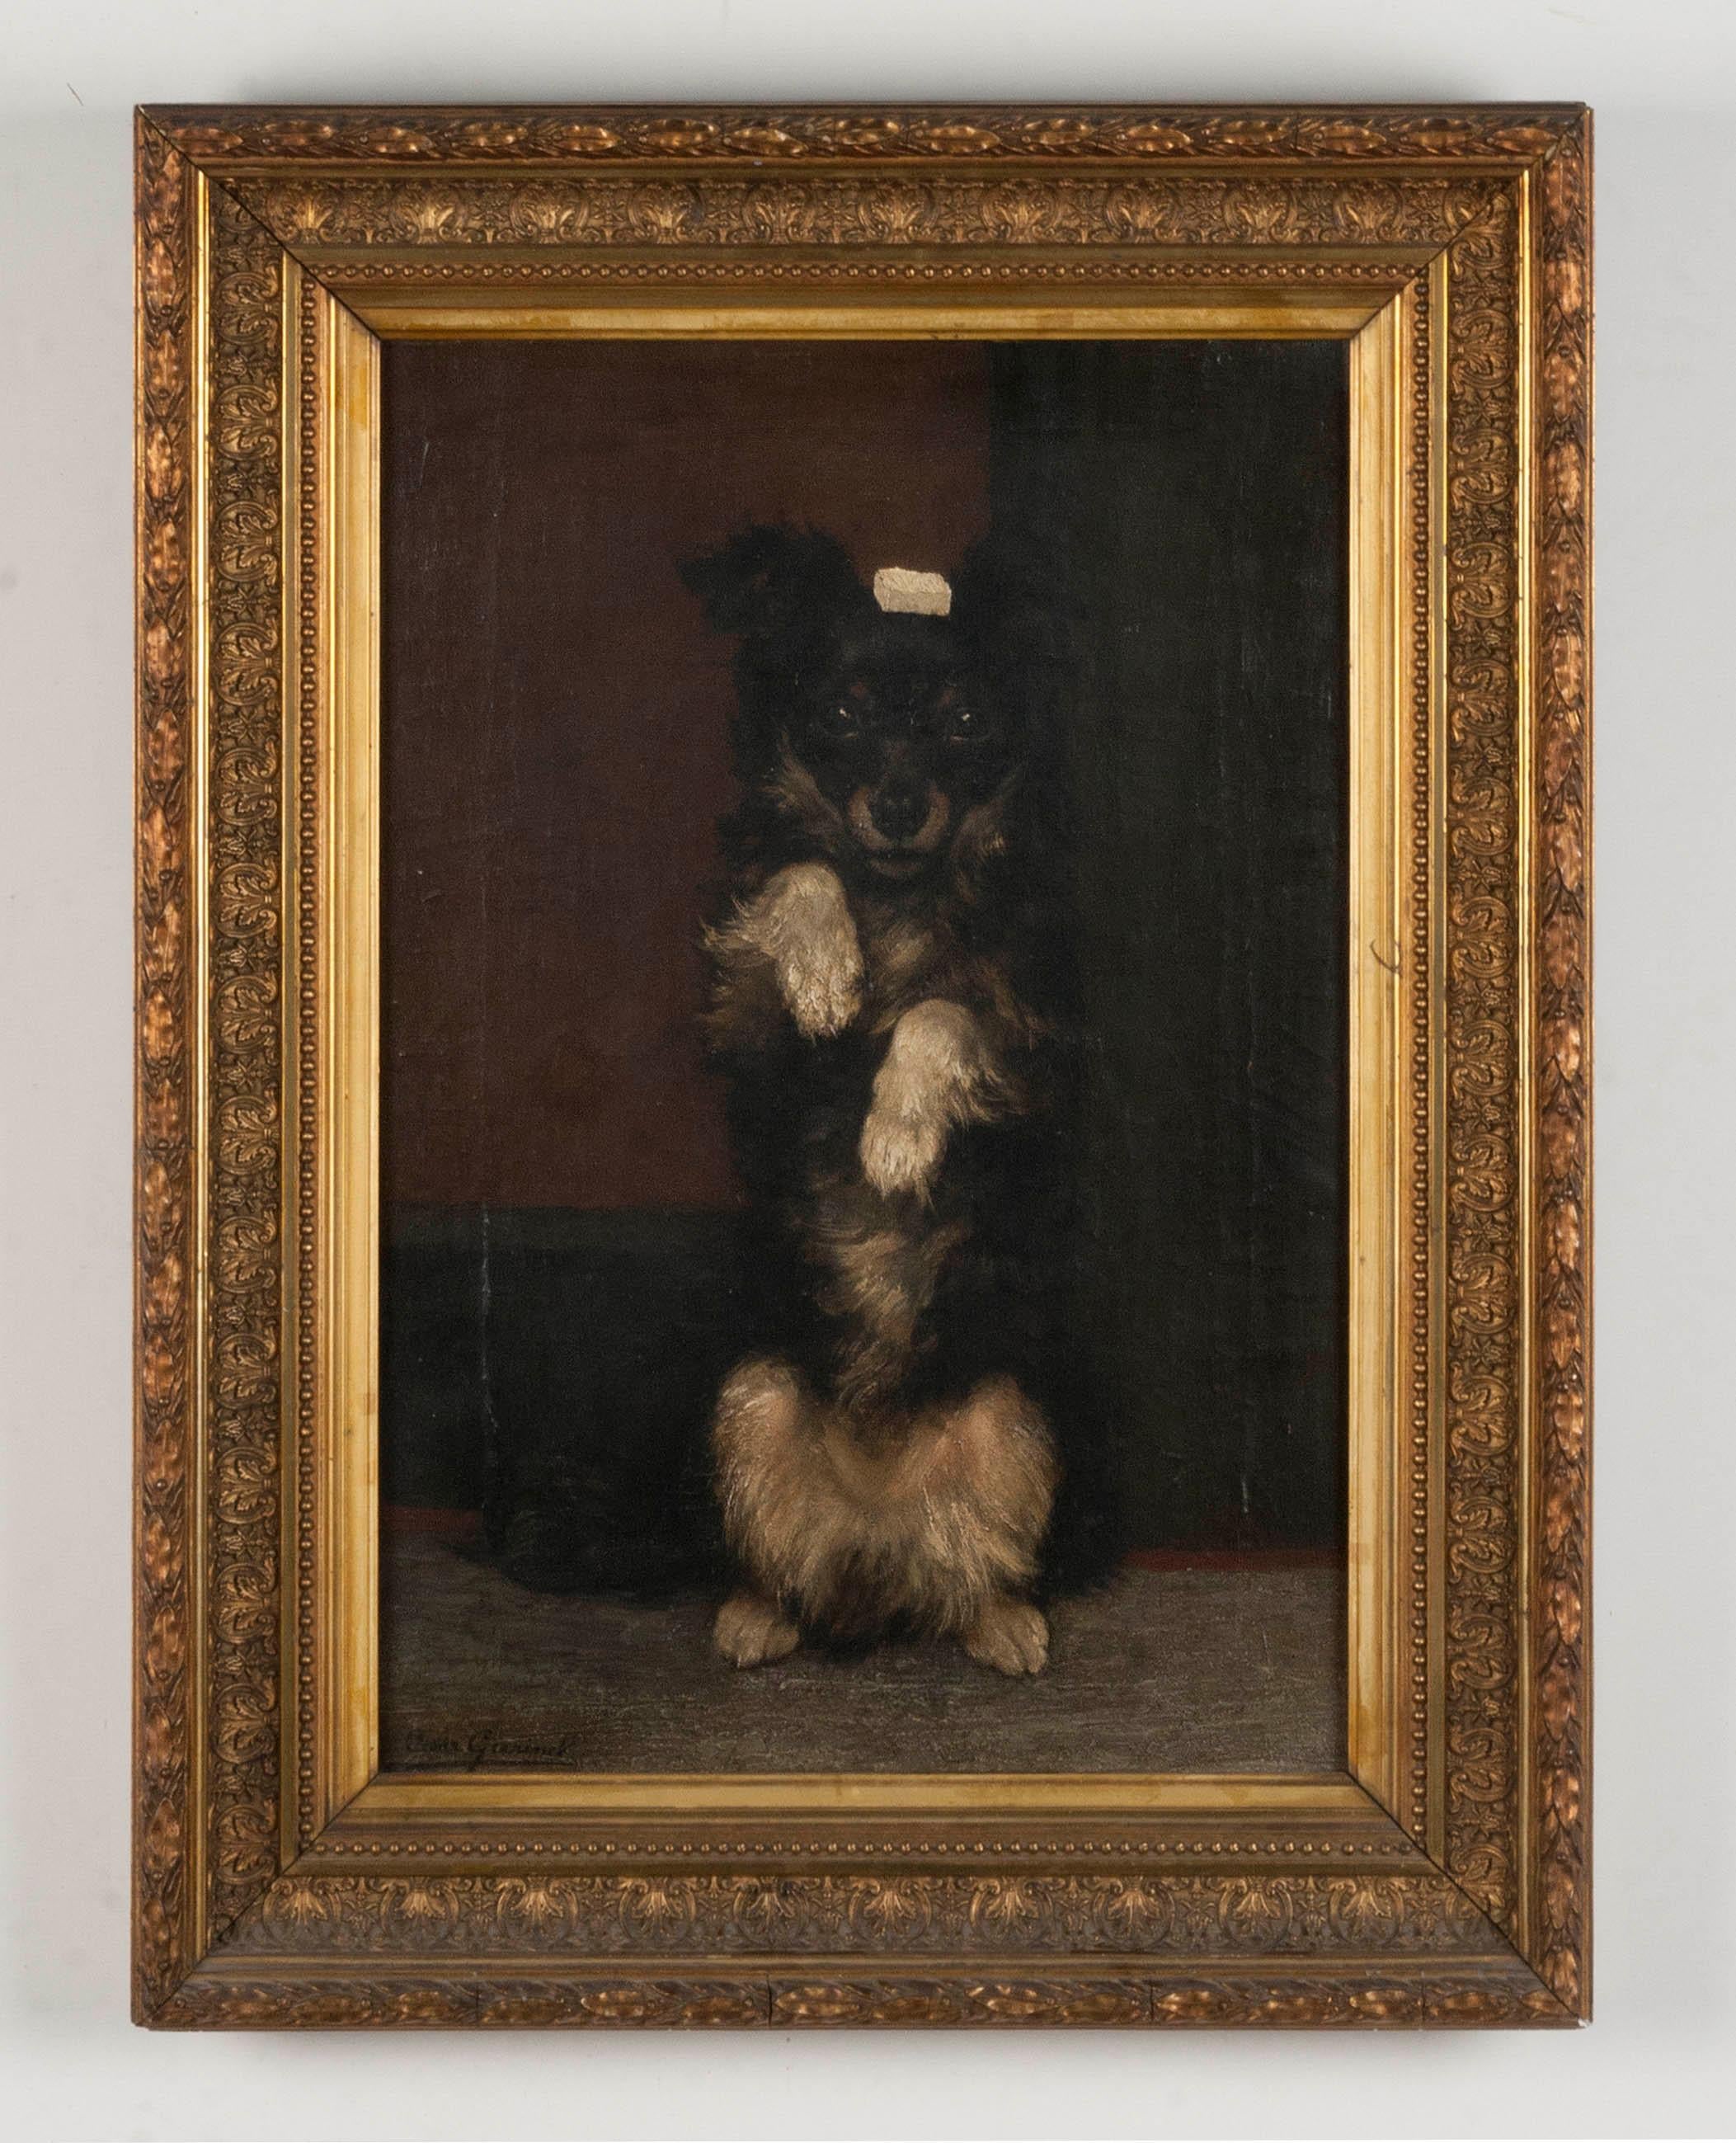 A wonderful portrait of a cheerful dog that does a trick. The dog has a sugar cube on his head and is sitting up. The painting was made, circa 1900 by the Flemish painter César Geerinck. This is not a very famous artist, he has painted a few other